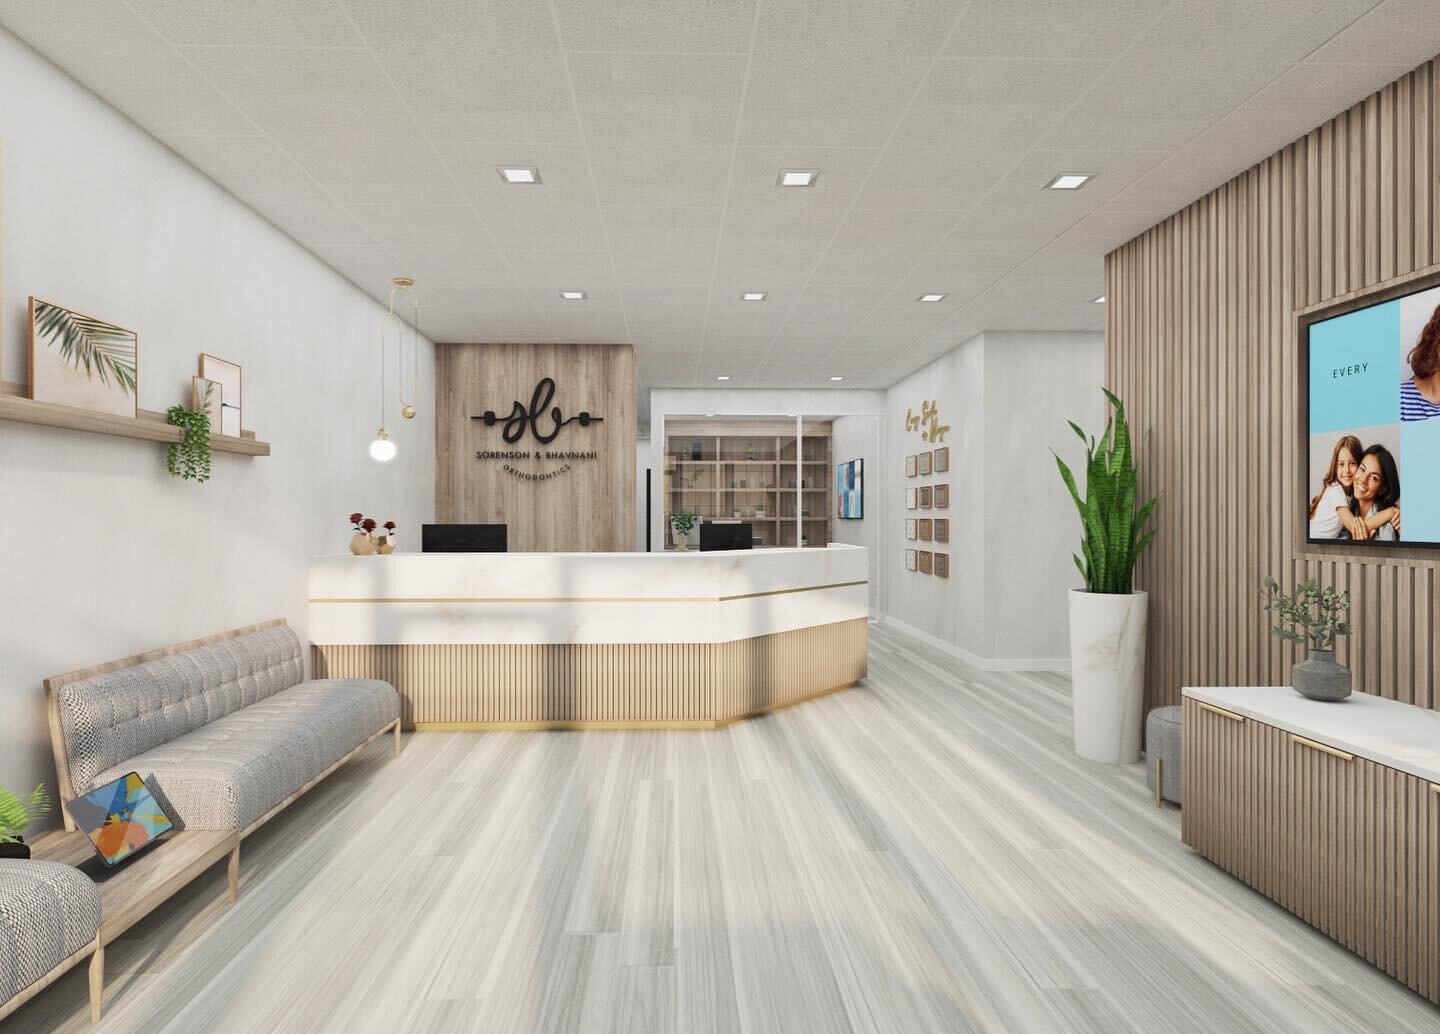 Dental office in the works! Can&rsquo;t wait until this beauty gets built. 

We are so blessed to have the opportunity to design this space and can&rsquo;t wait until construction begins! 

#dentaloffice #rendering #dentist #interiordesign #architect